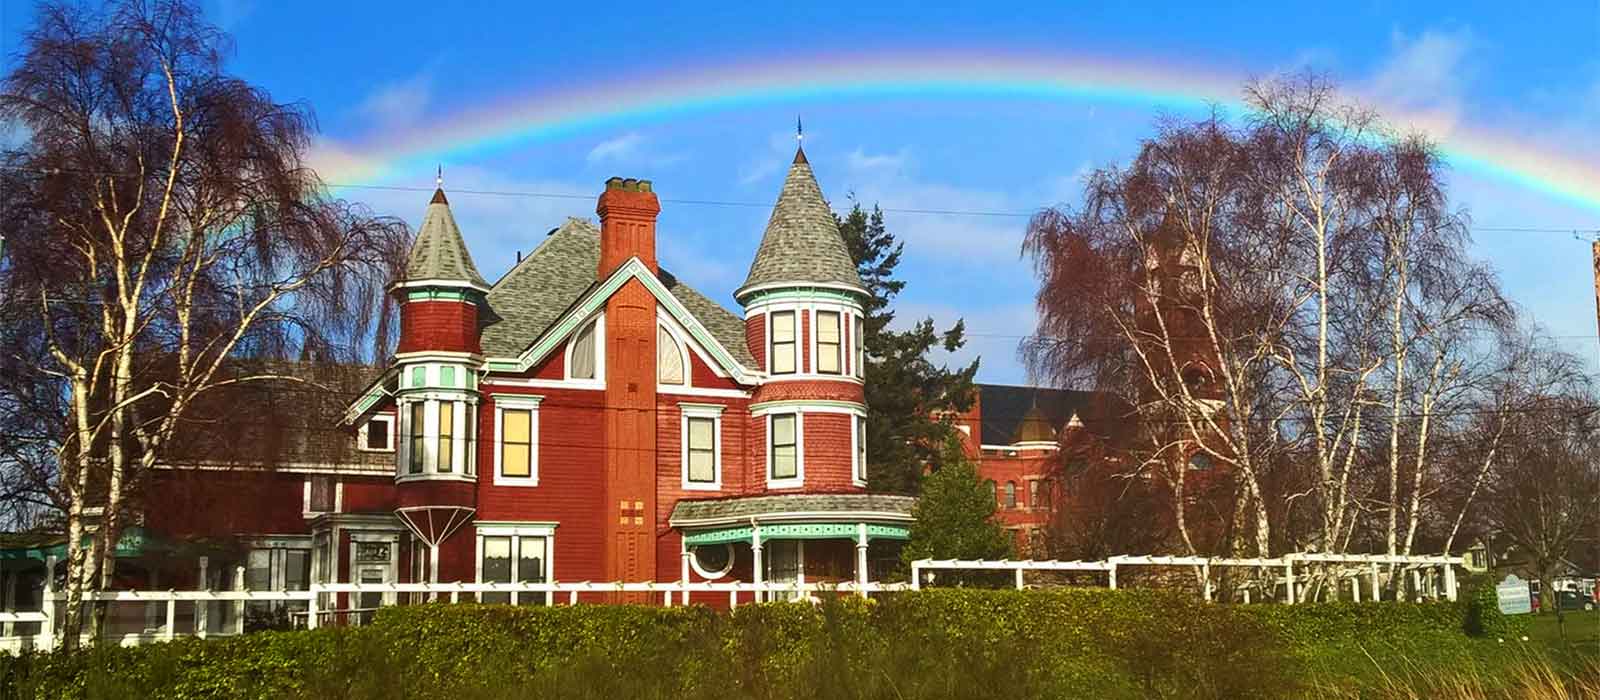 Side view of the Old Consulate Inn beneath a rainbow with the Jefferson County courthouse in the distance